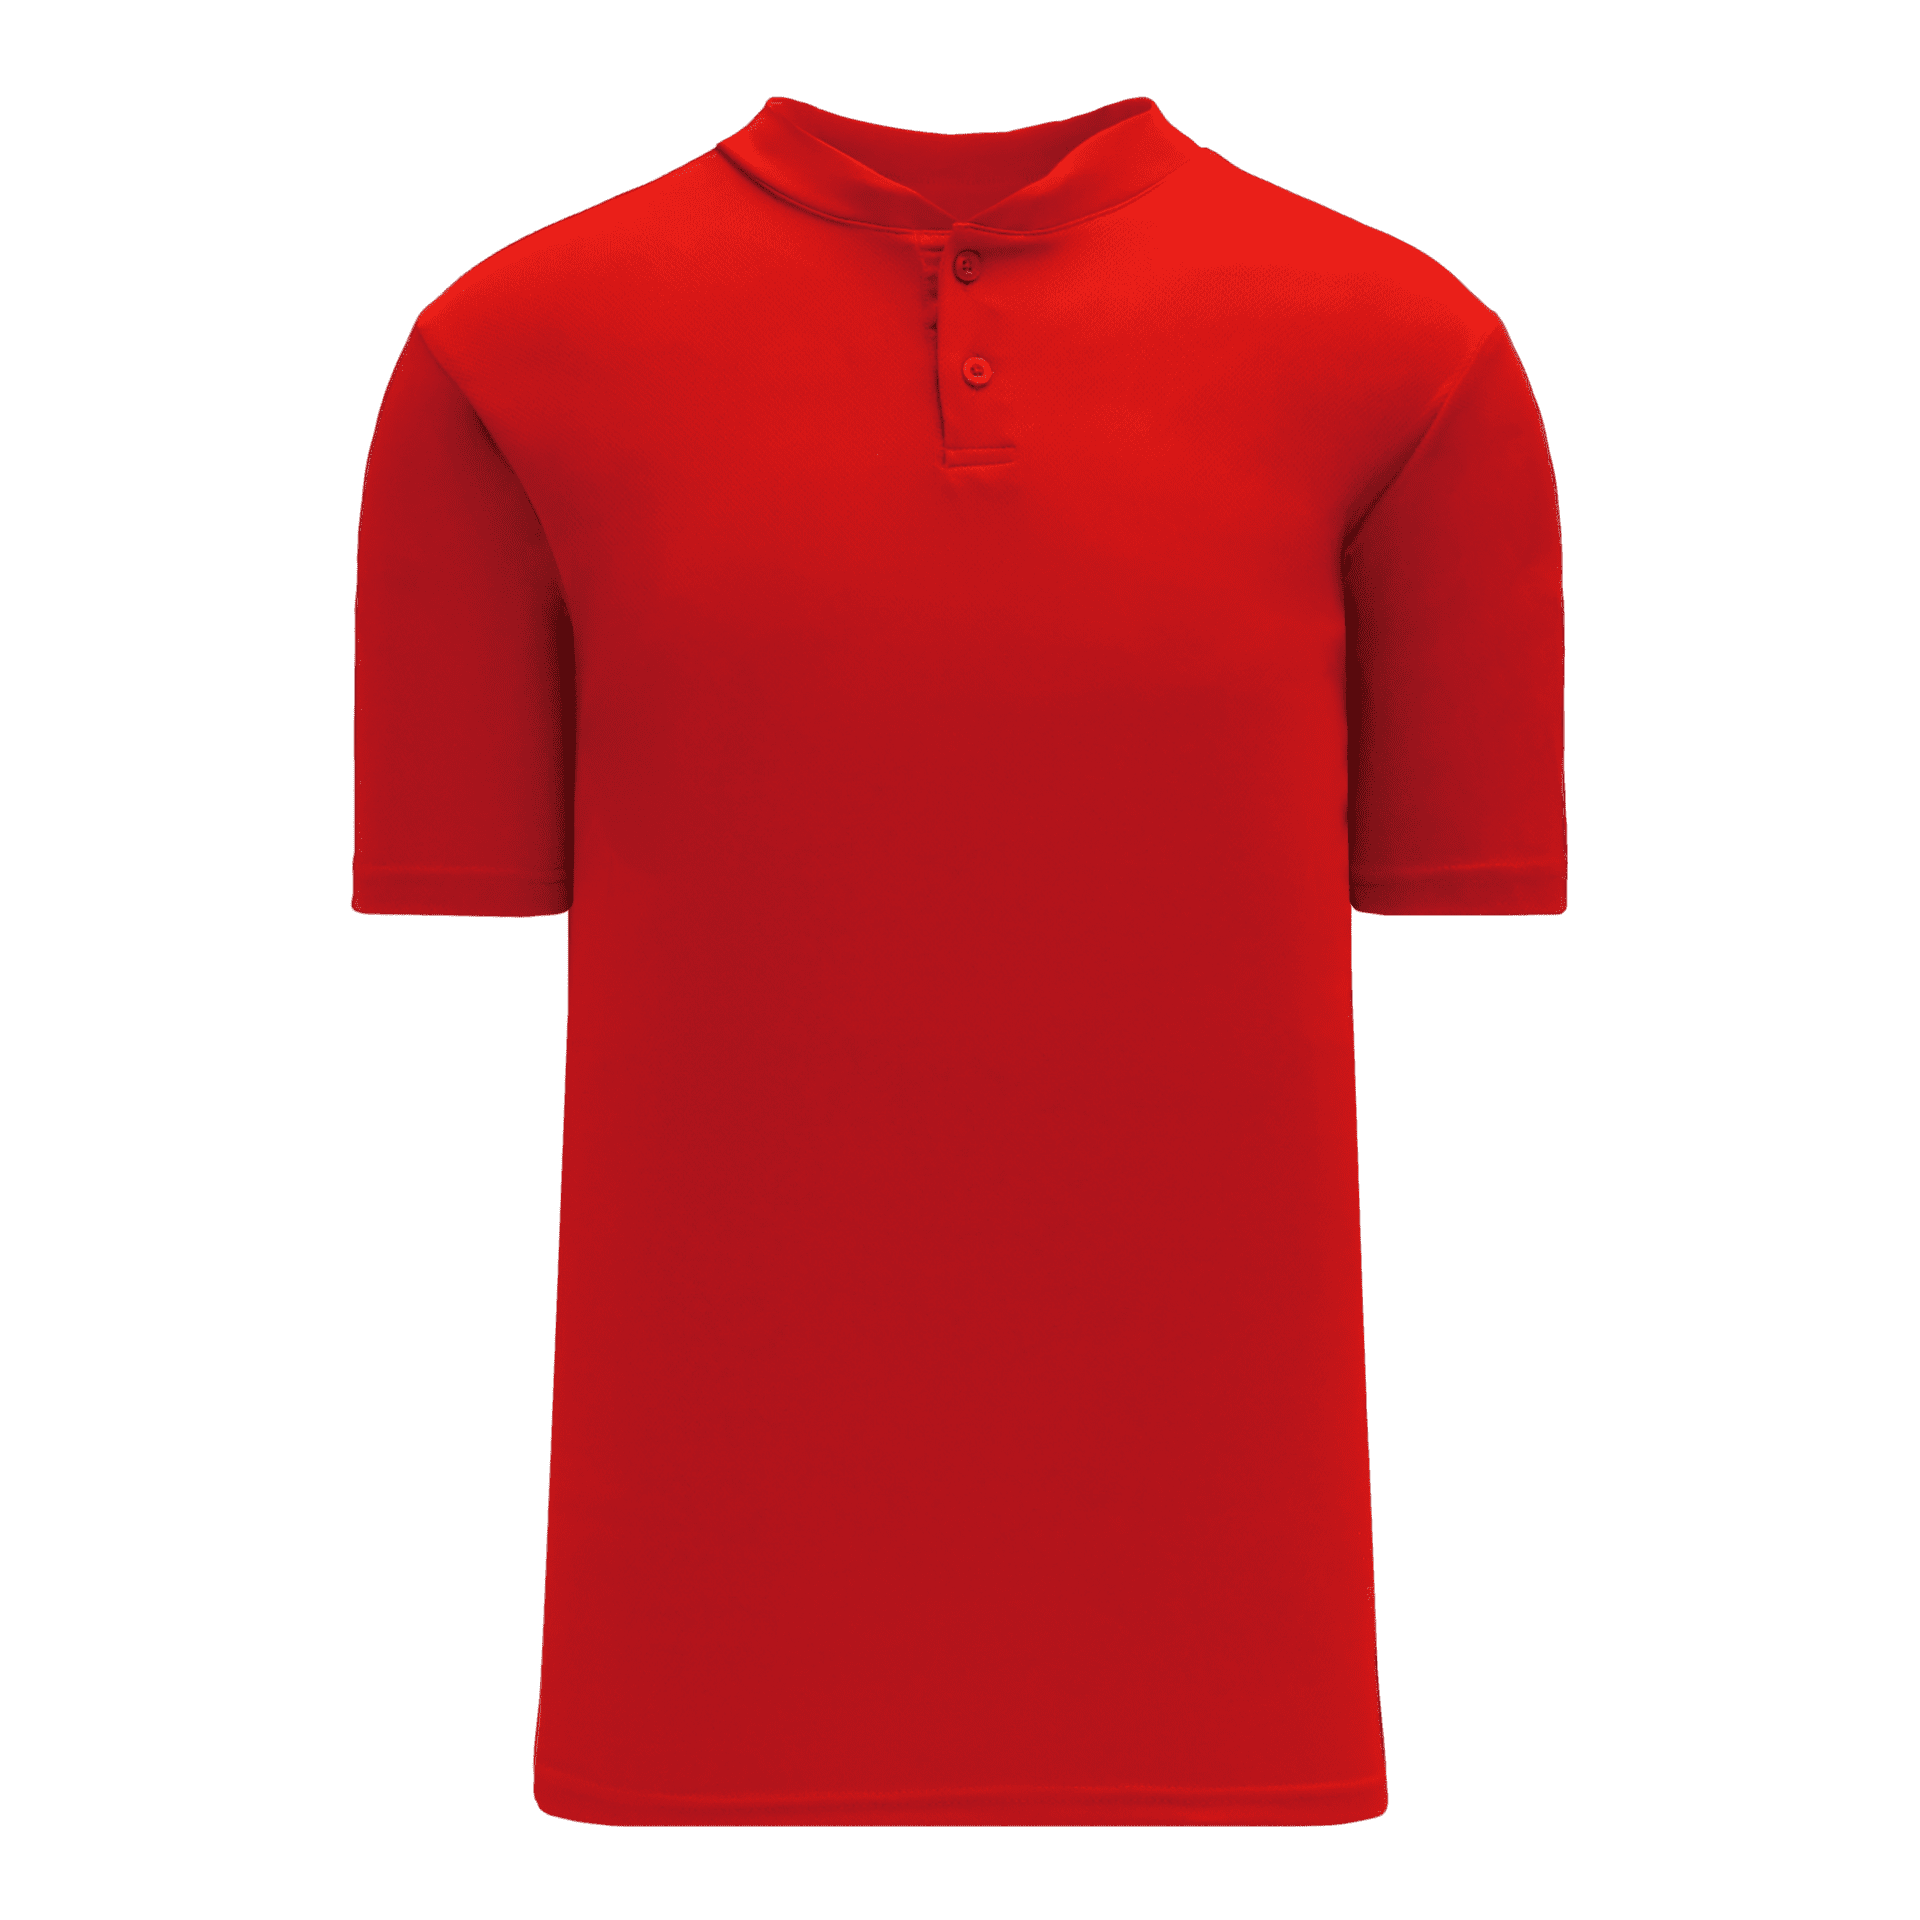 ATHLETIC KNIT TWO BUTTON BASEBALL JERSEY #BA1347 Red